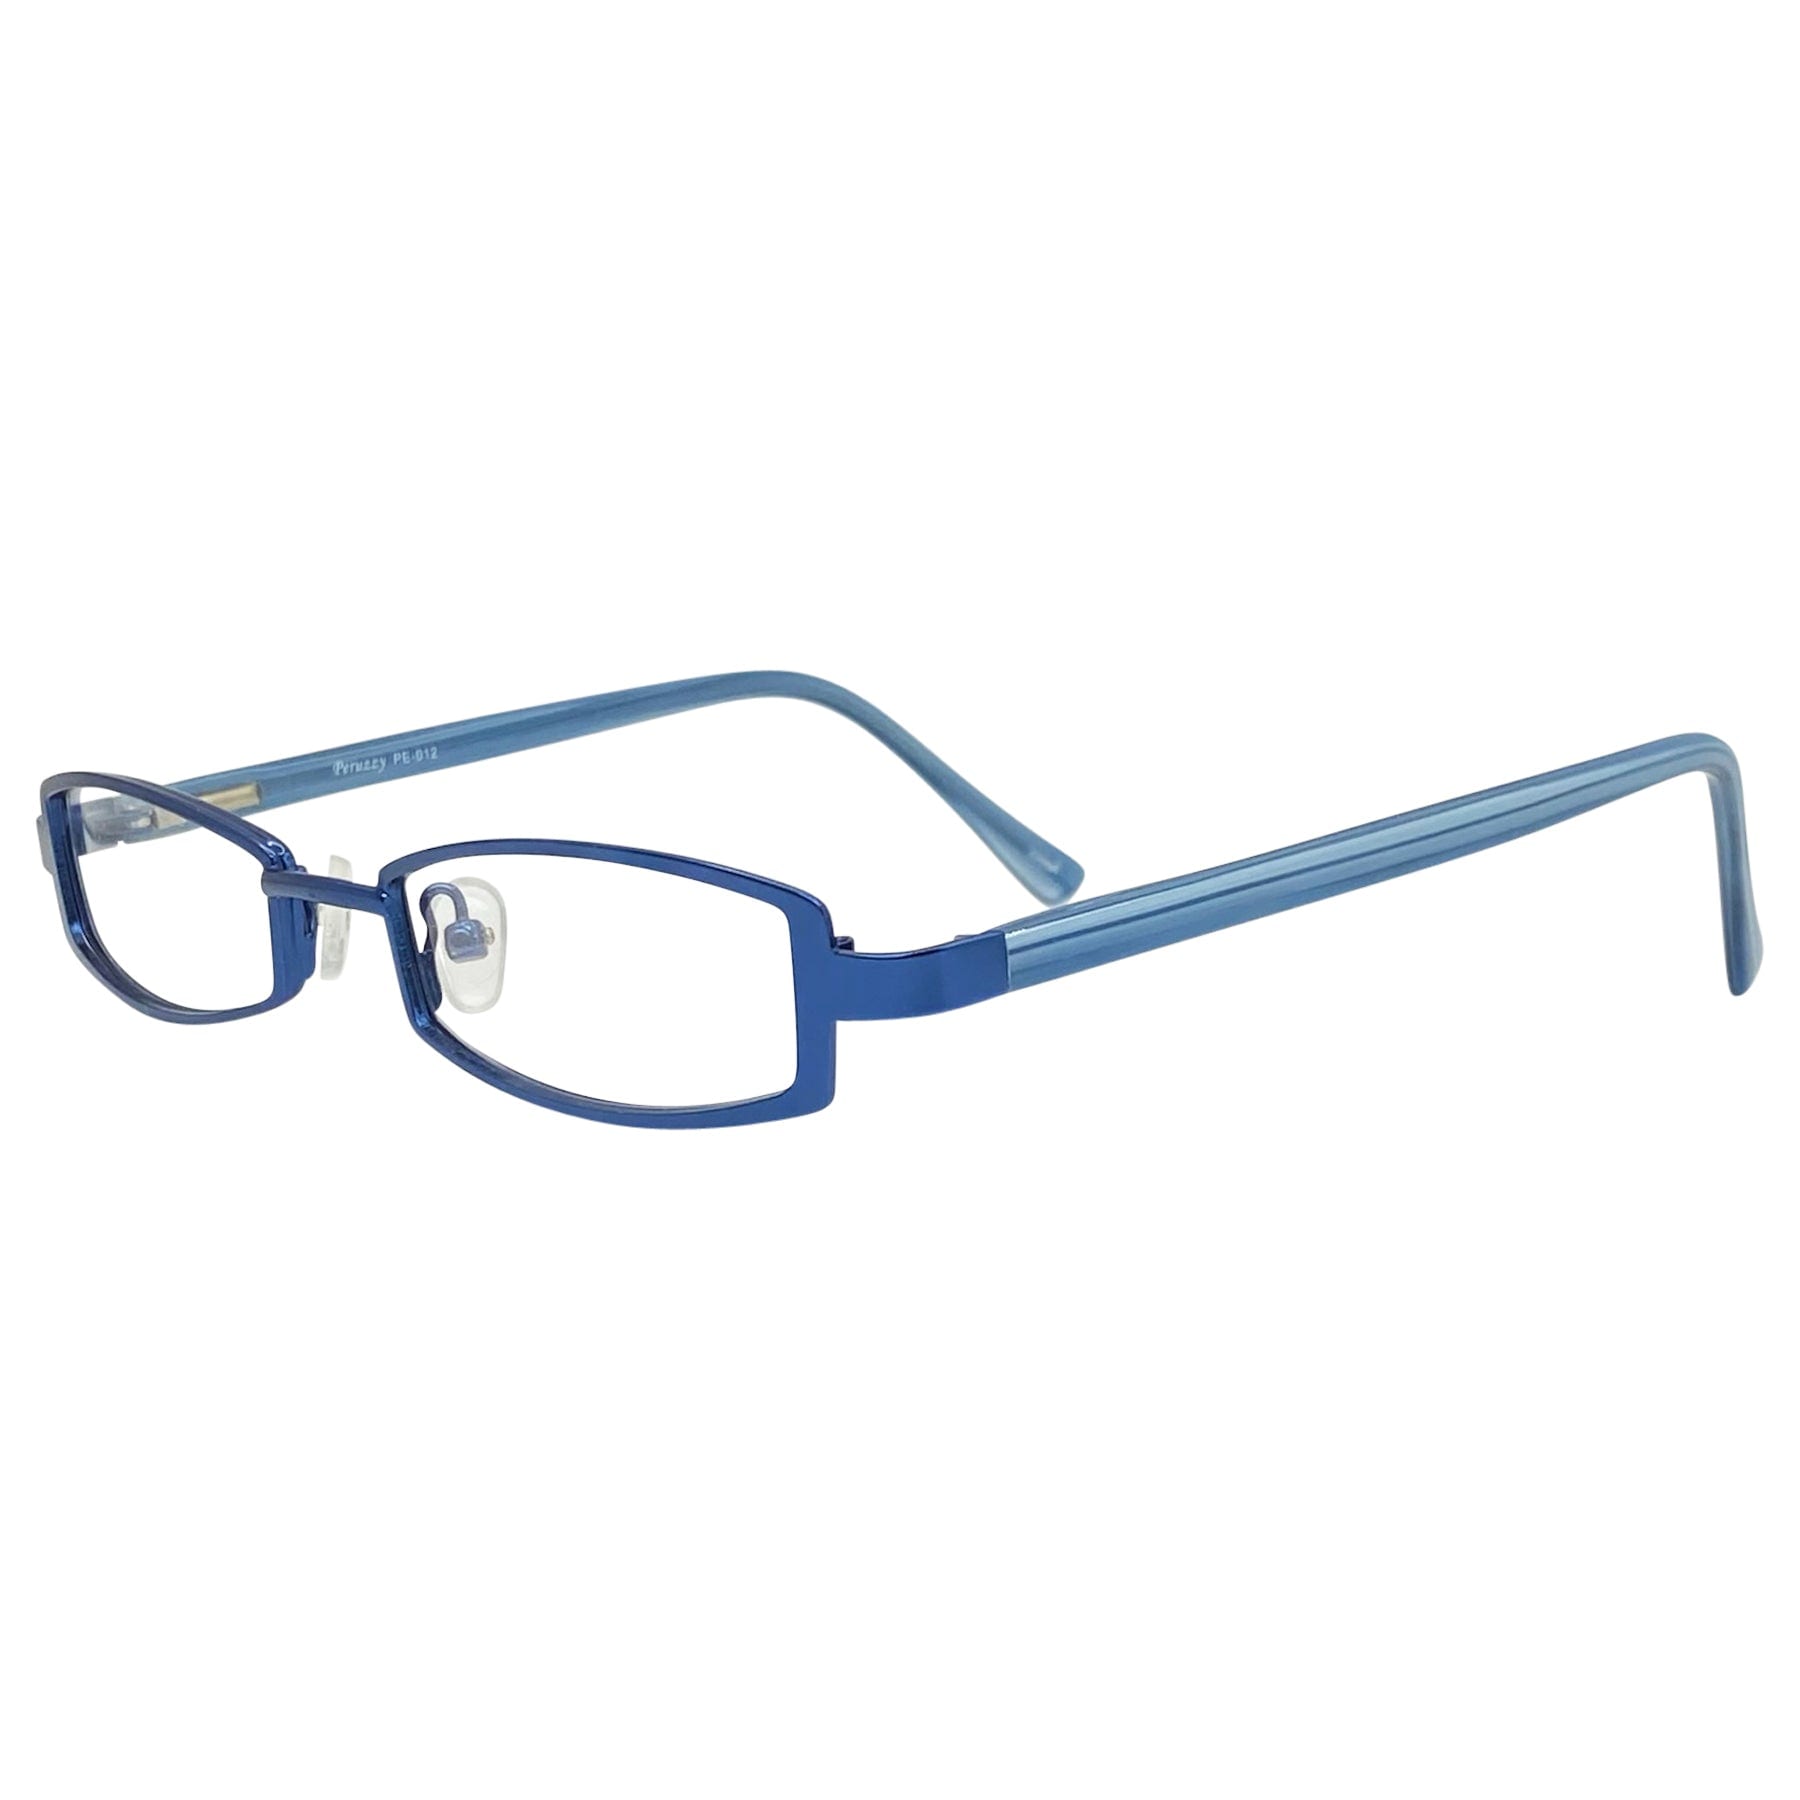 clear glasses men and women, unisex clear 90s frame